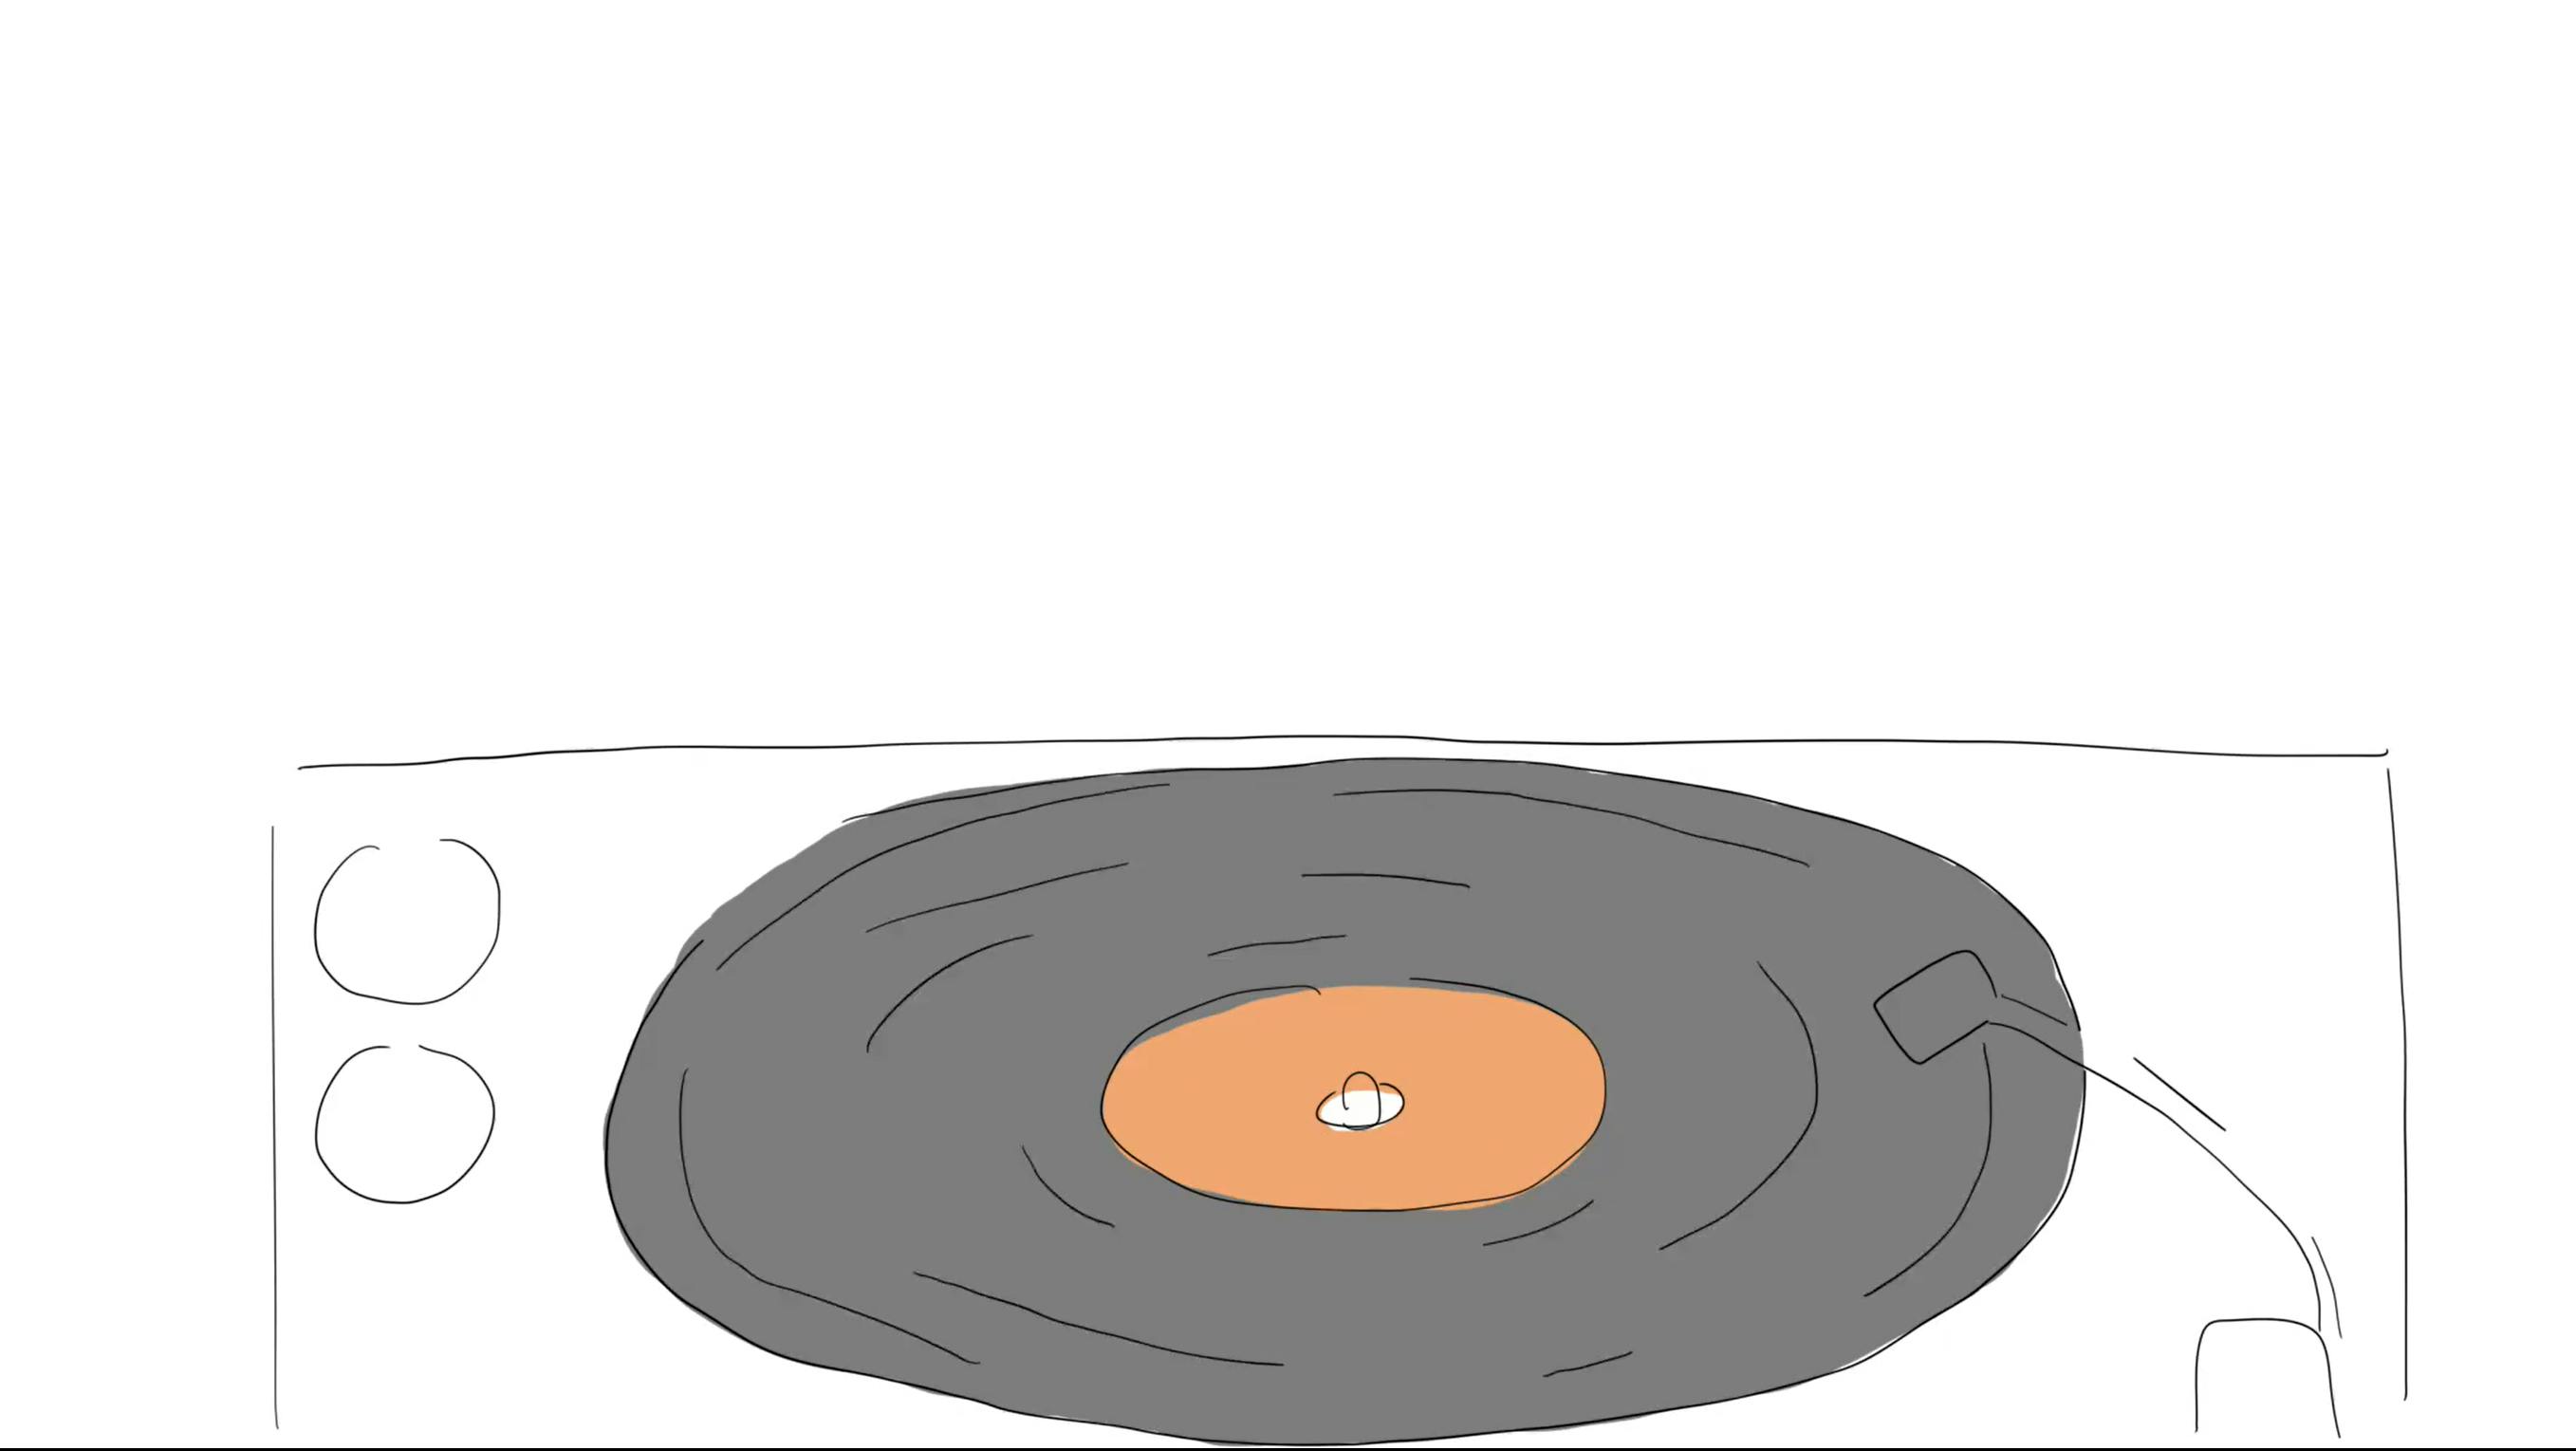 A drawing of a vinyl on a record player